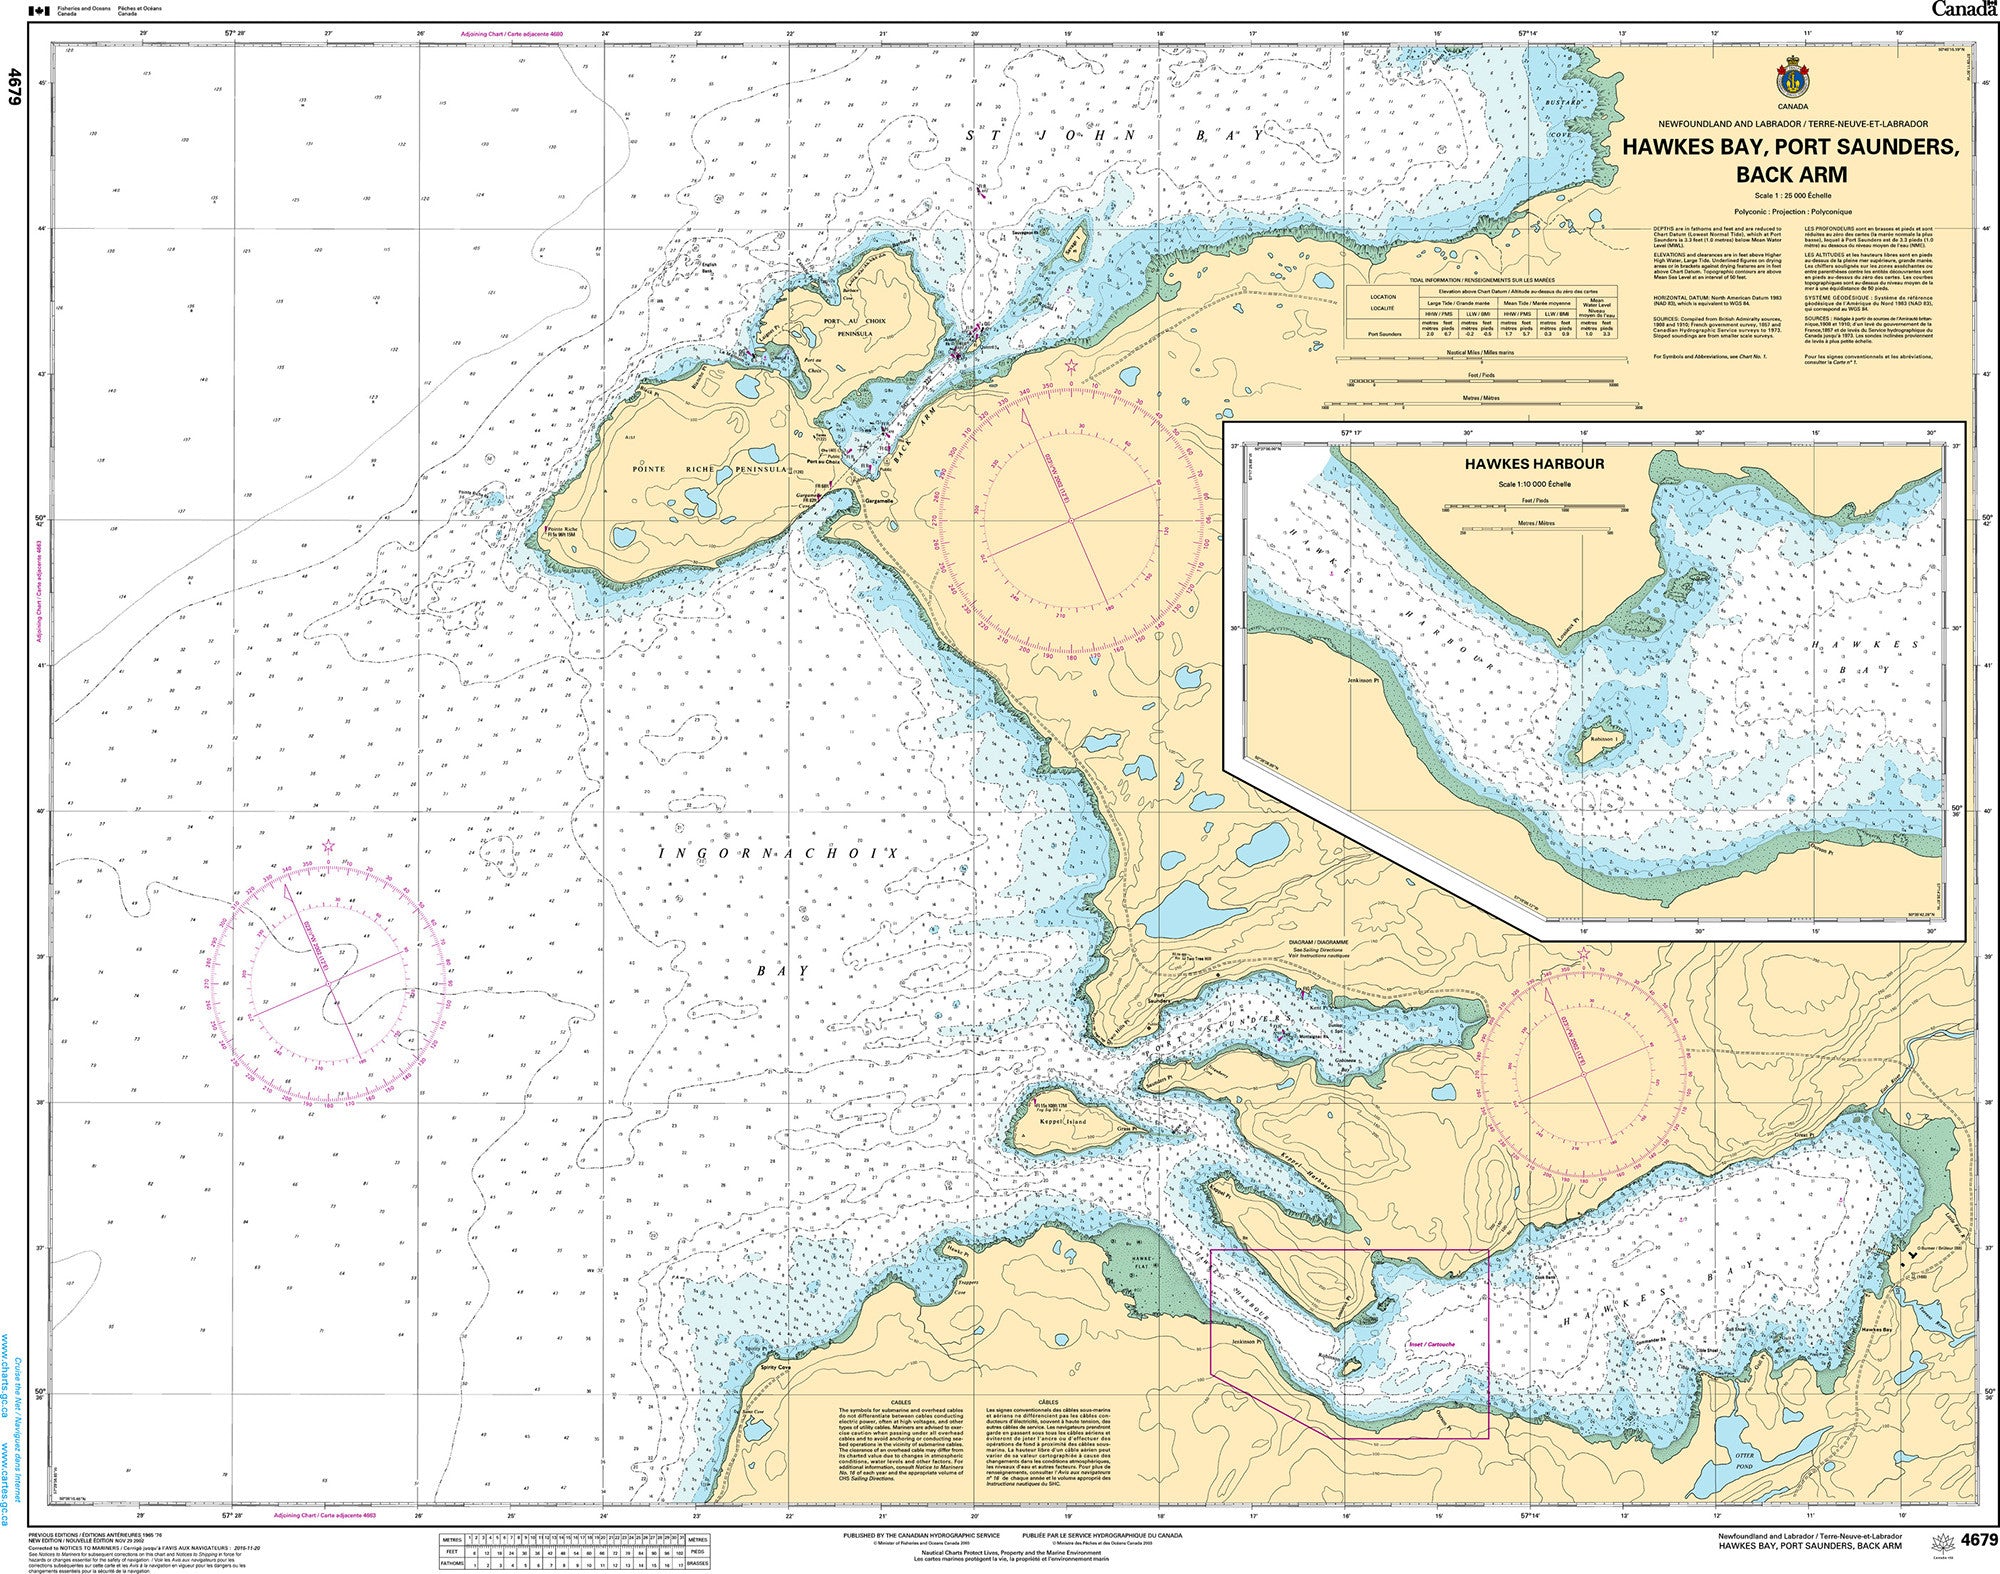 Canadian Hydrographic Service Nautical Chart CHS4679: Hawkes Bay, Port Saunders, Back Arm